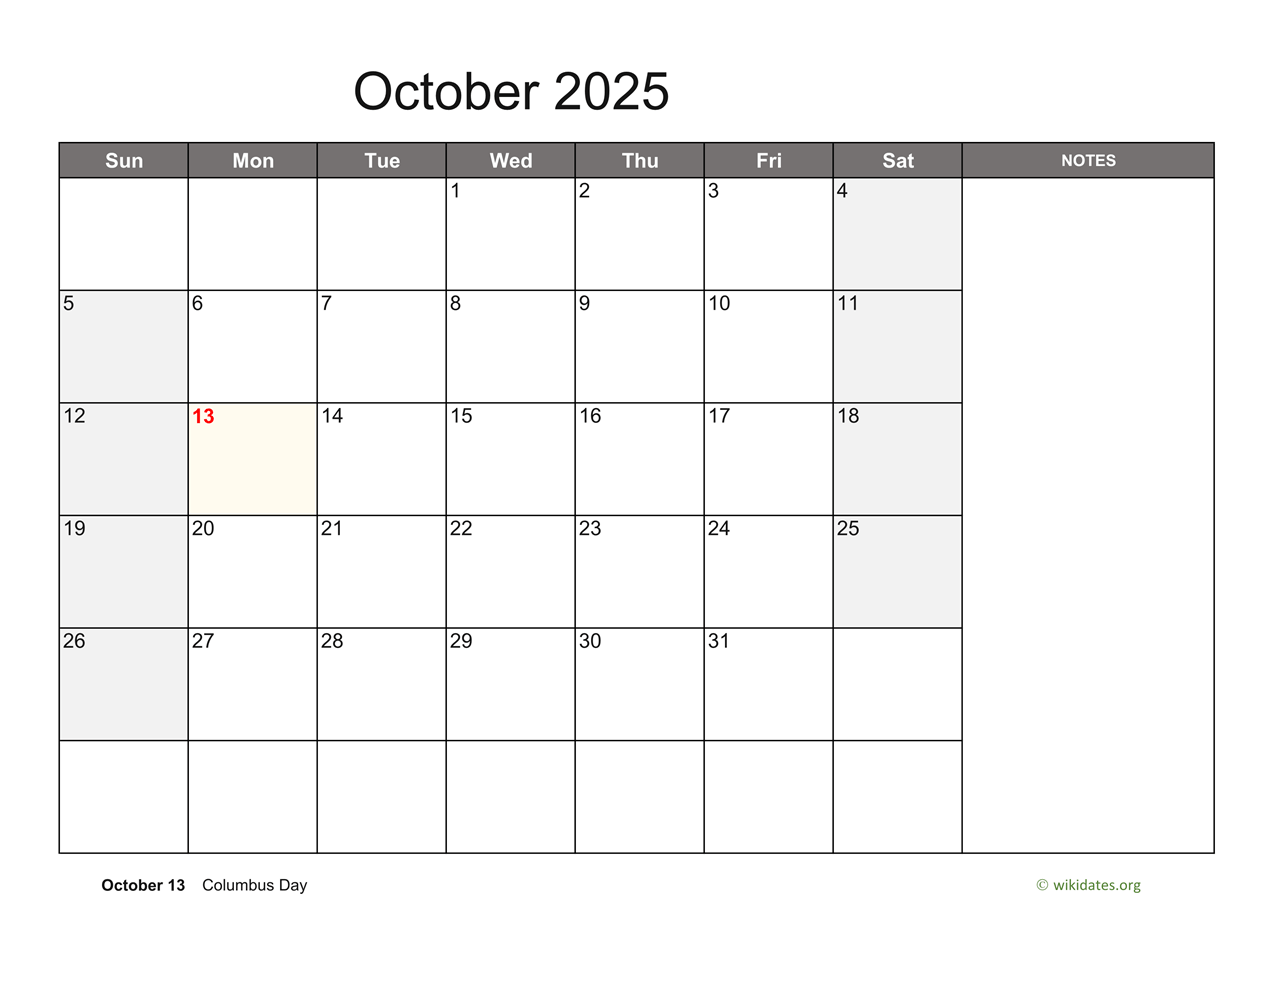 october-2025-calendar-with-notes-wikidates